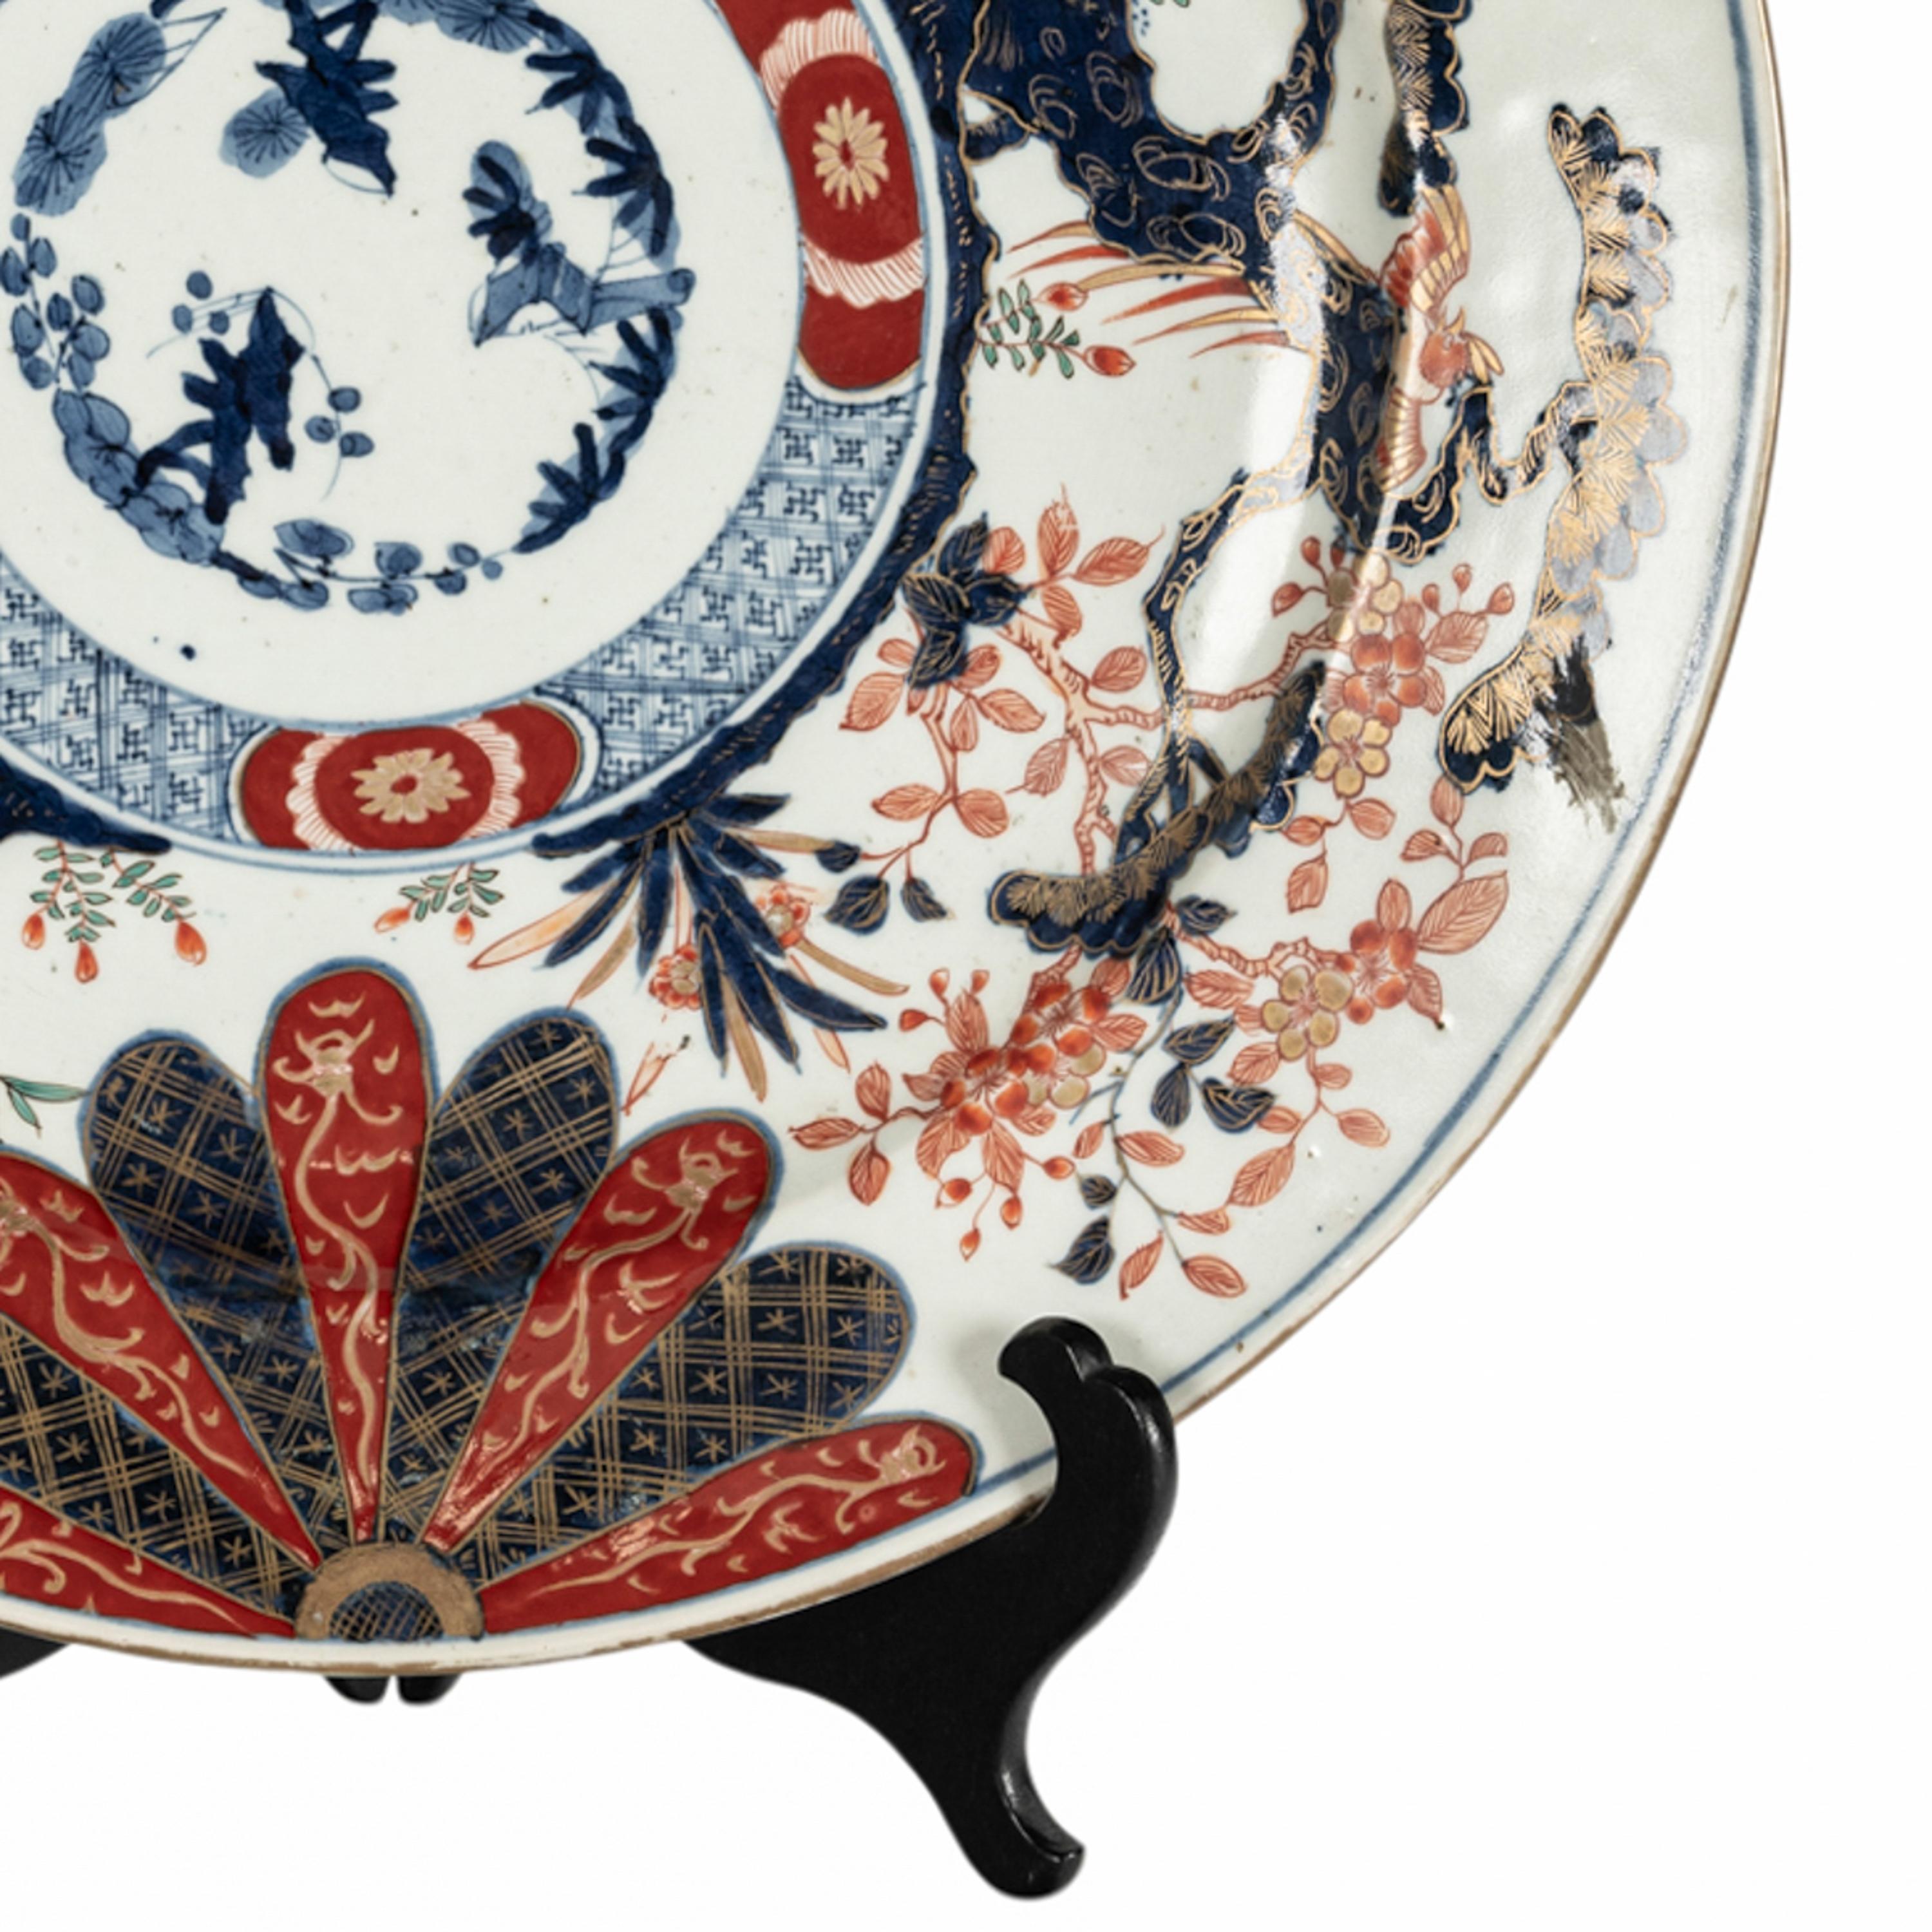 Monumental Antique Japanese Meiji Period Imari Porcelain Charger Plate 1880 For Sale 2